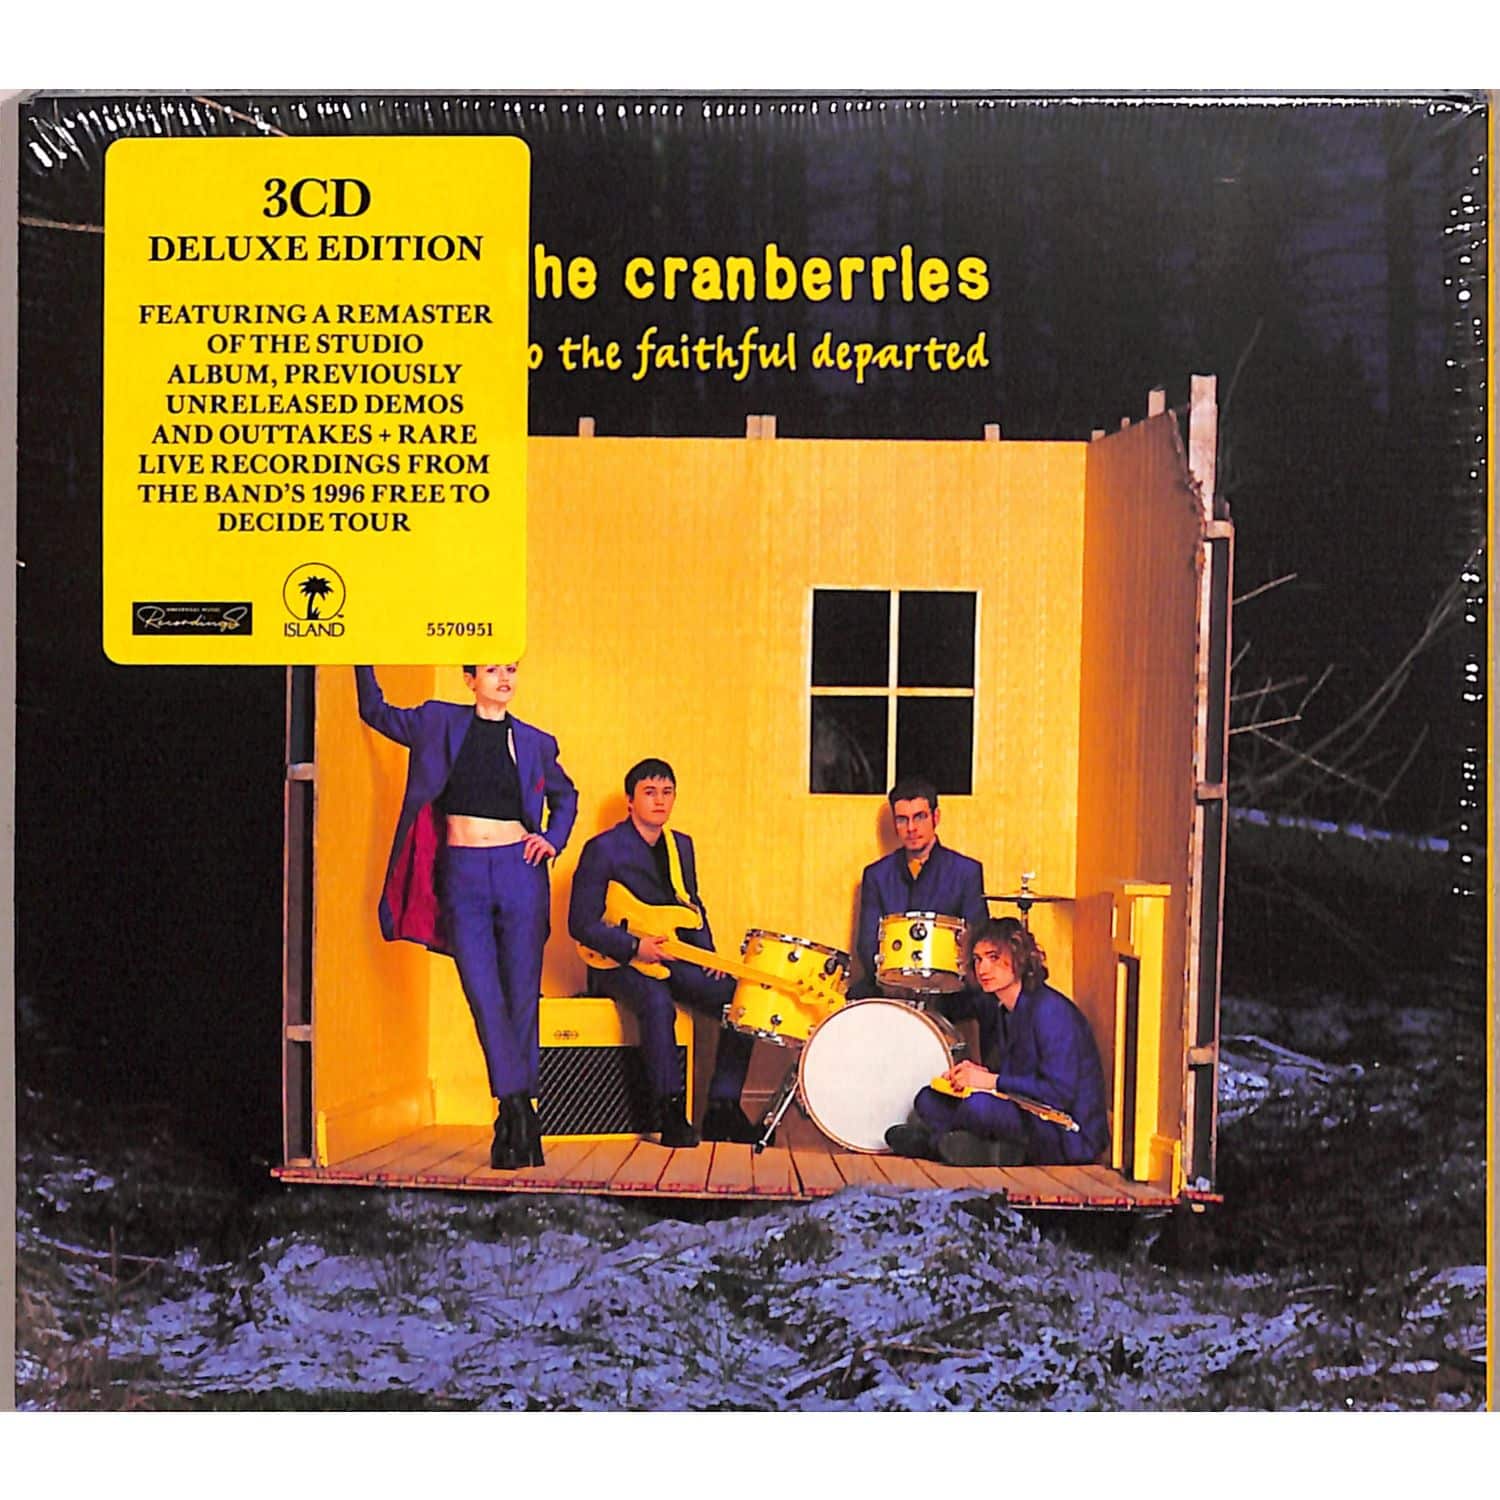 The Cranberries - TO THE FAITHFUL DEPARTED 